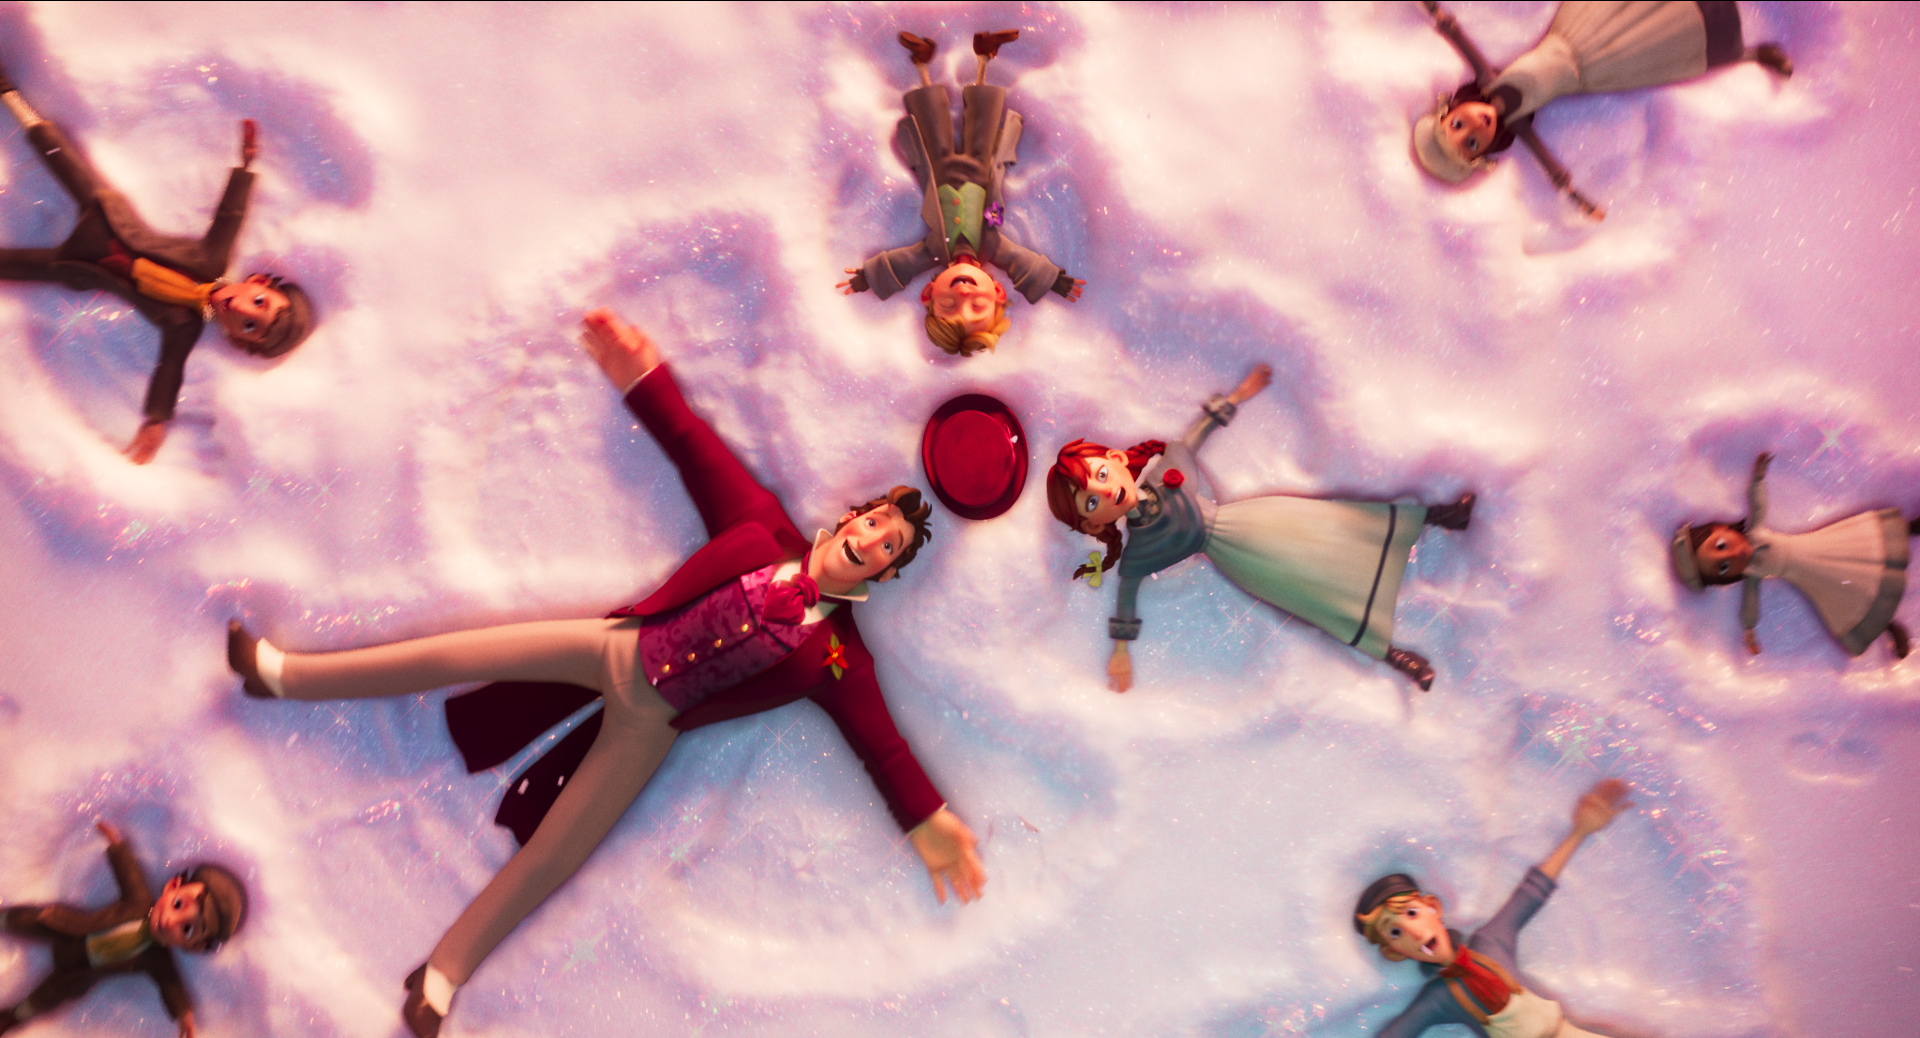 Still from Scrooge: A Christmas Carol. Animated characters making snow angels in snow